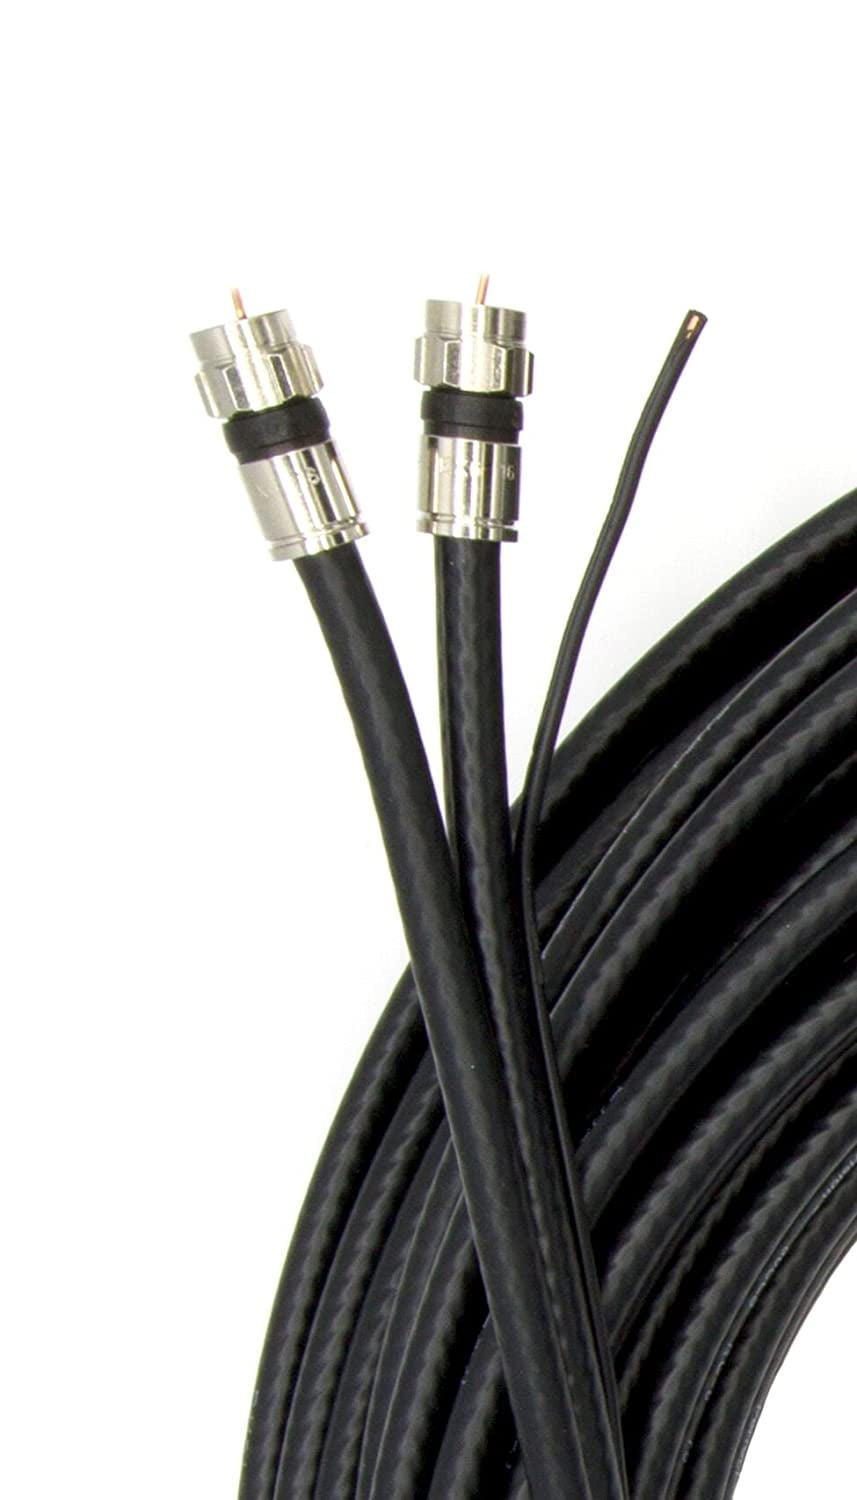 RG6 AT&T DIRECTV APPROVED 3GHz 18AWG COAX COAXIAL CABLE INDOOR OUTDOOR 5ft-200ft 